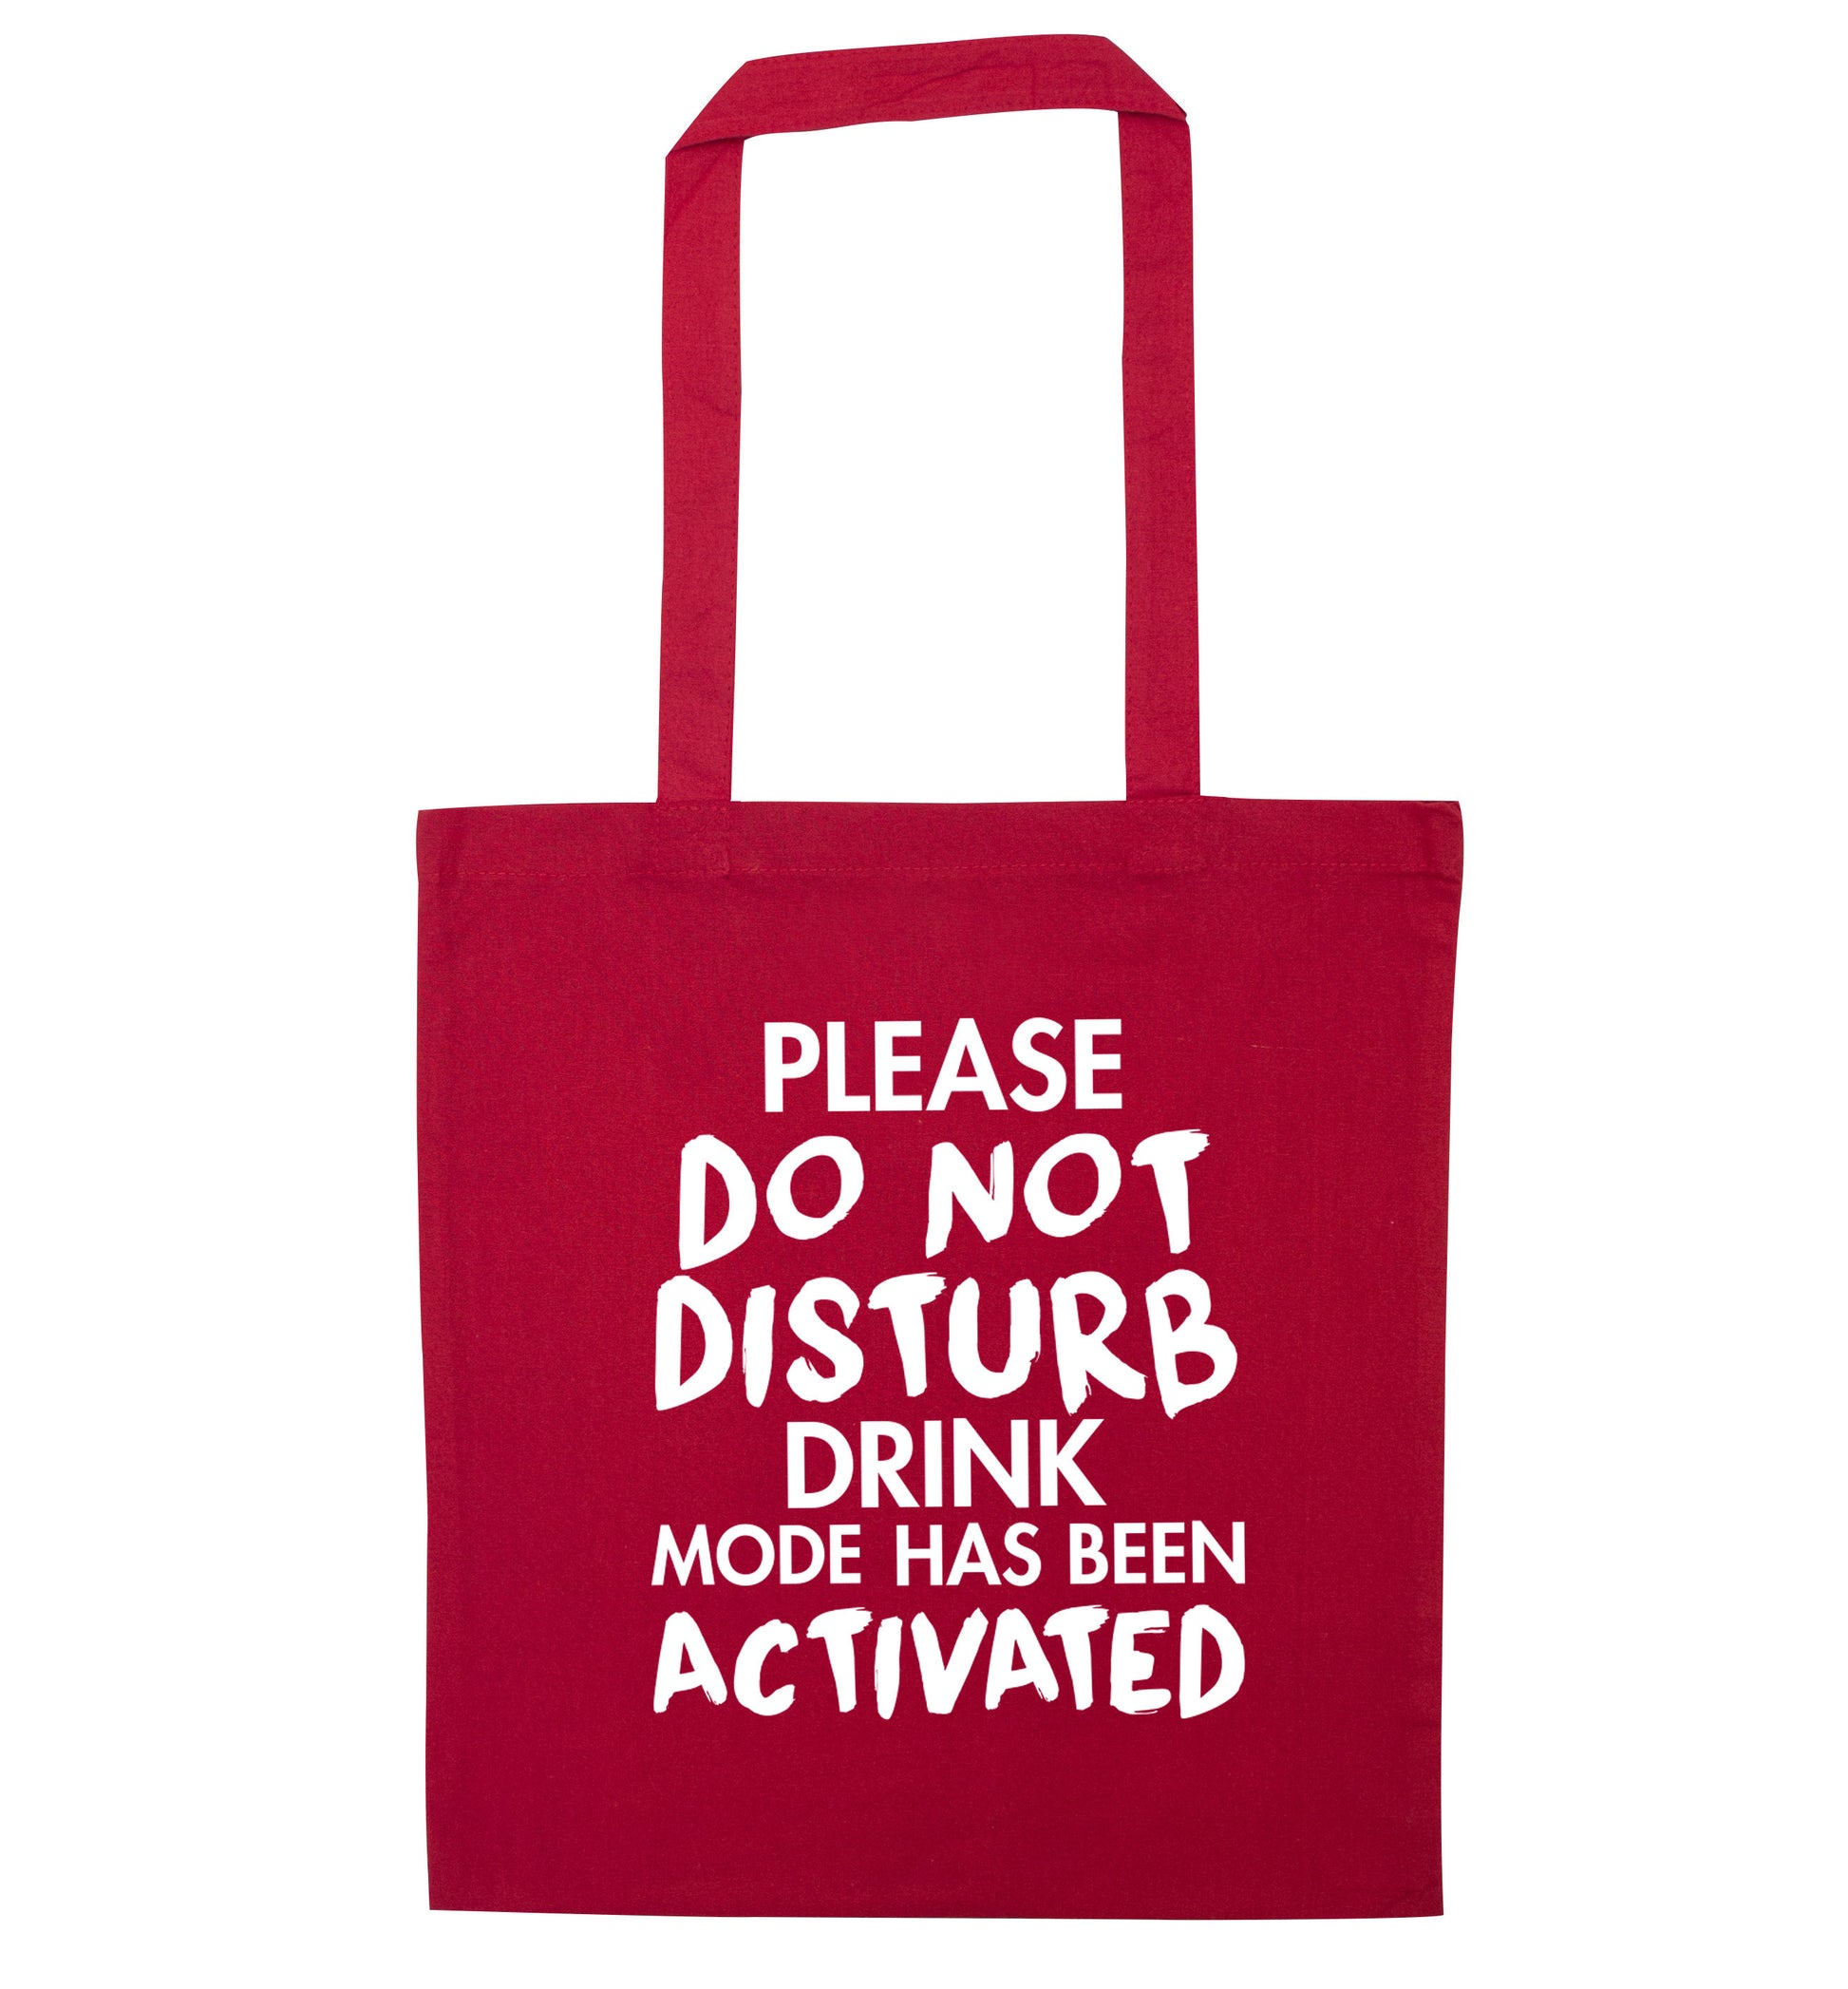 Please do not disturb drink mode has been activated red tote bag